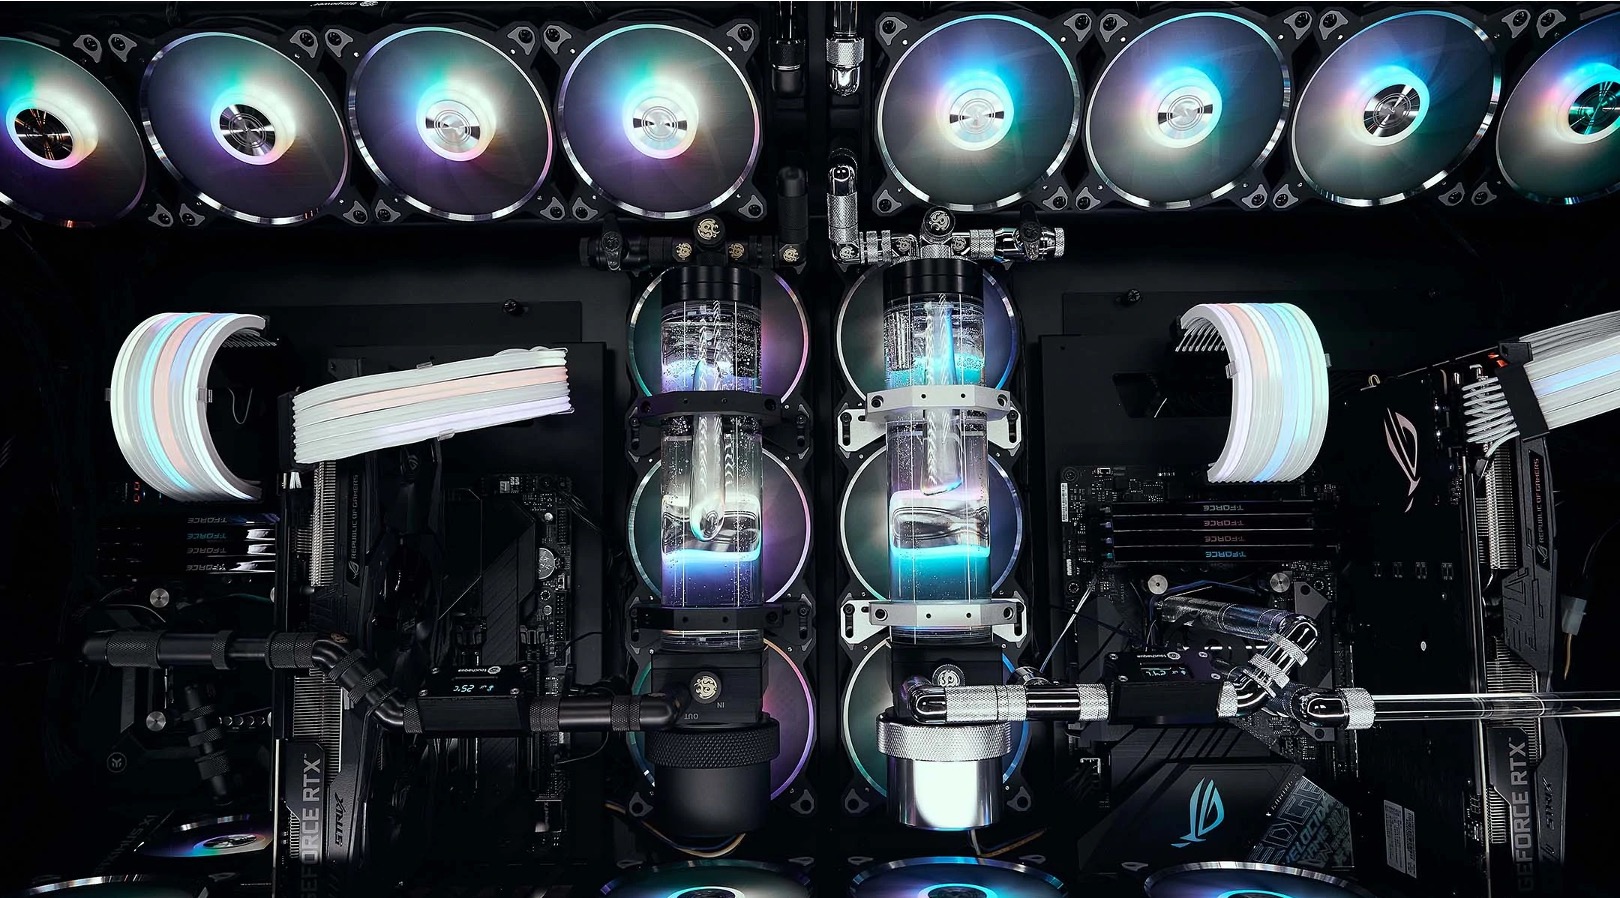 How Do You Check The Max Speed Your Case Fan Will Run At